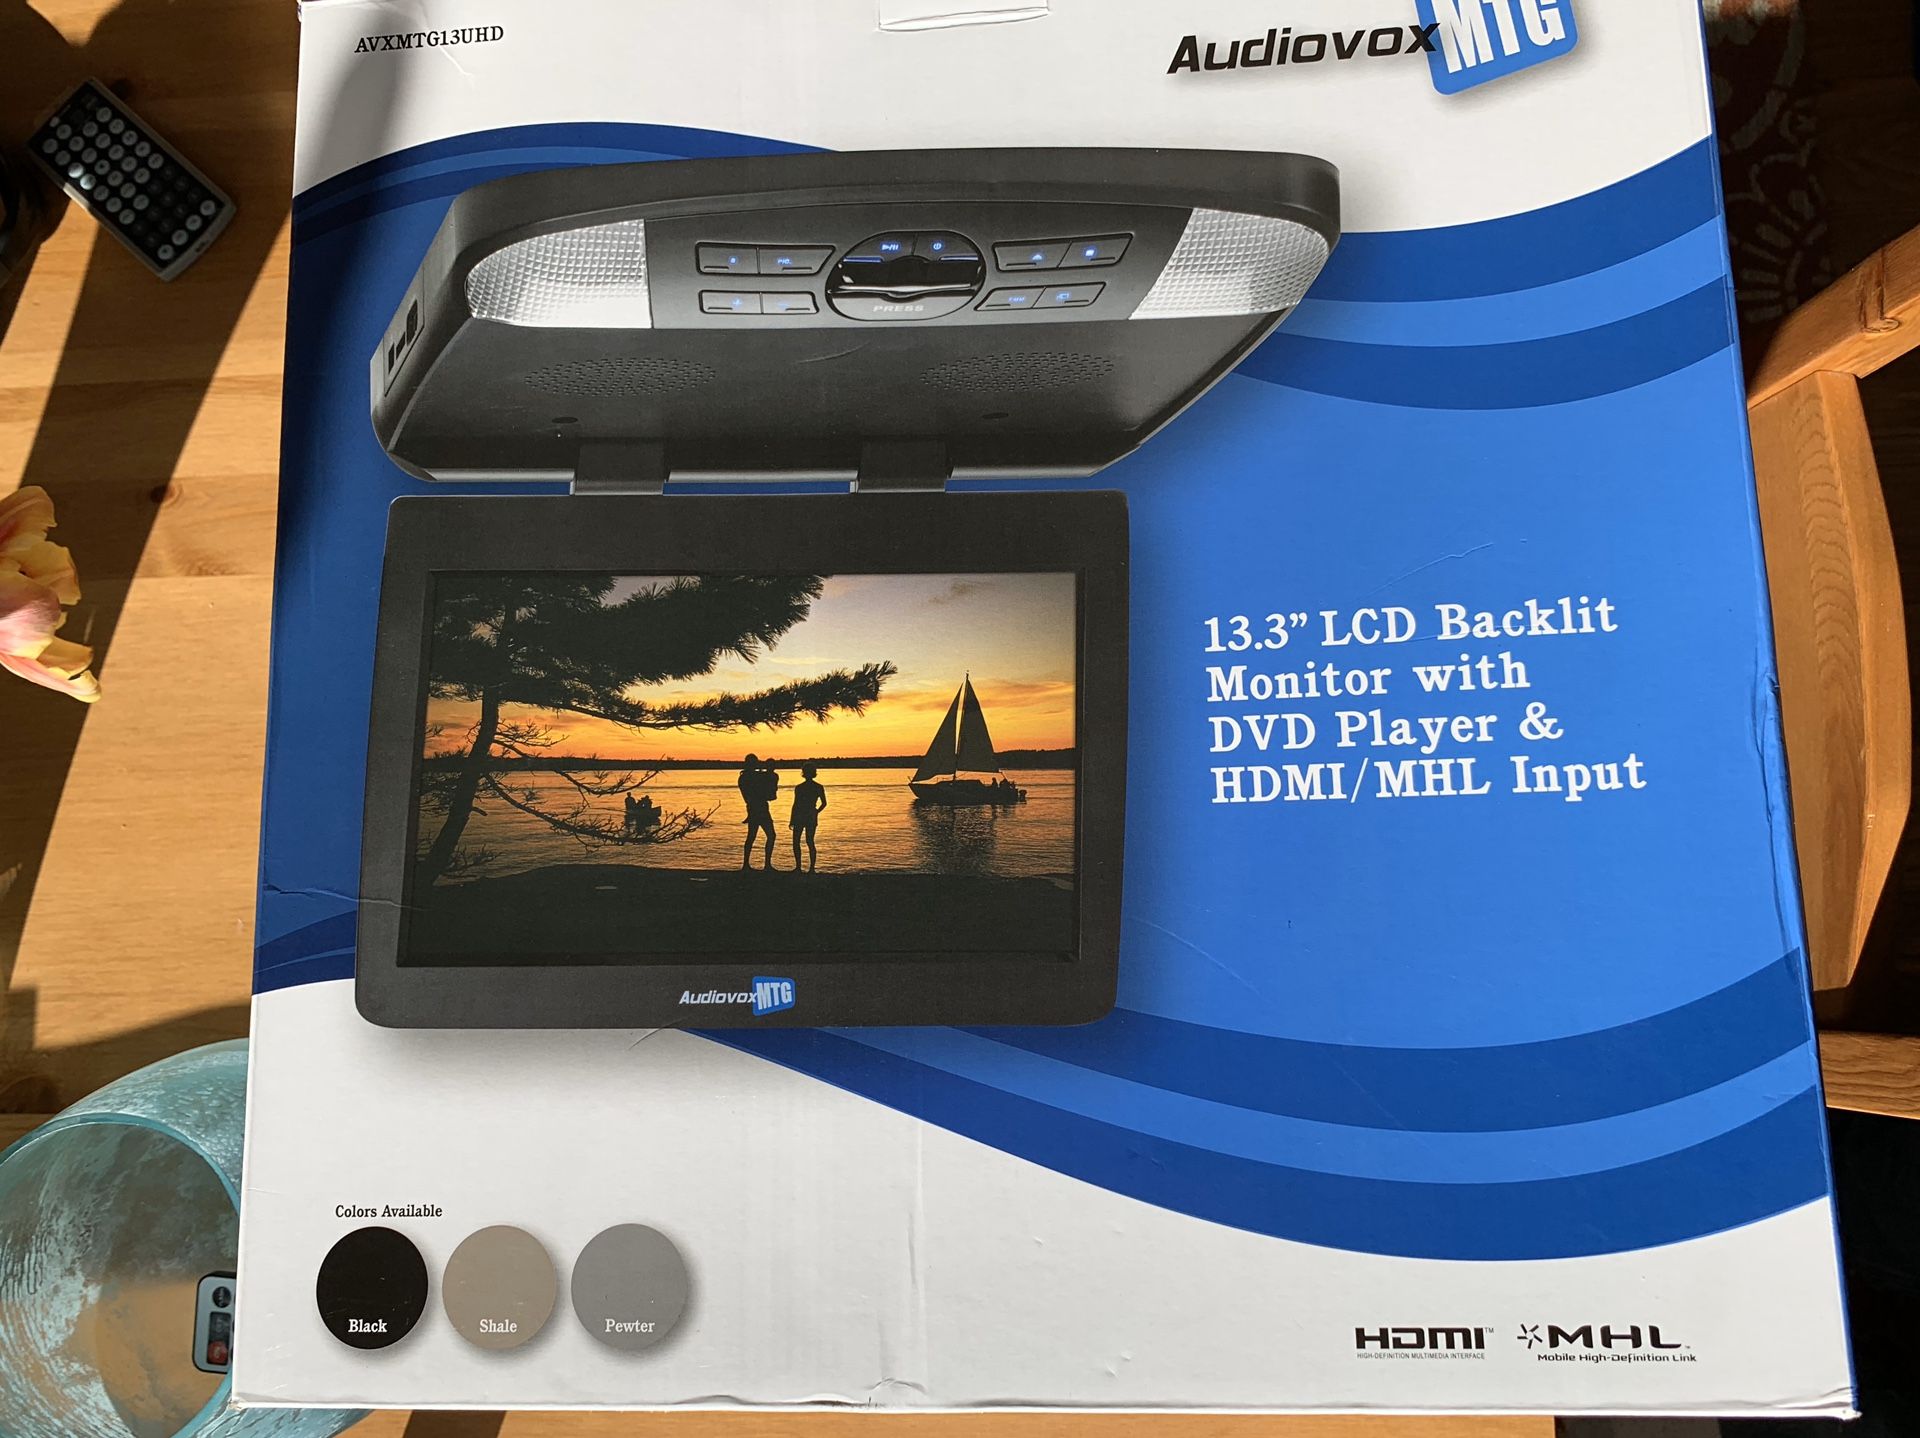 New Audiovox HD Car SUV DVD Player with extras